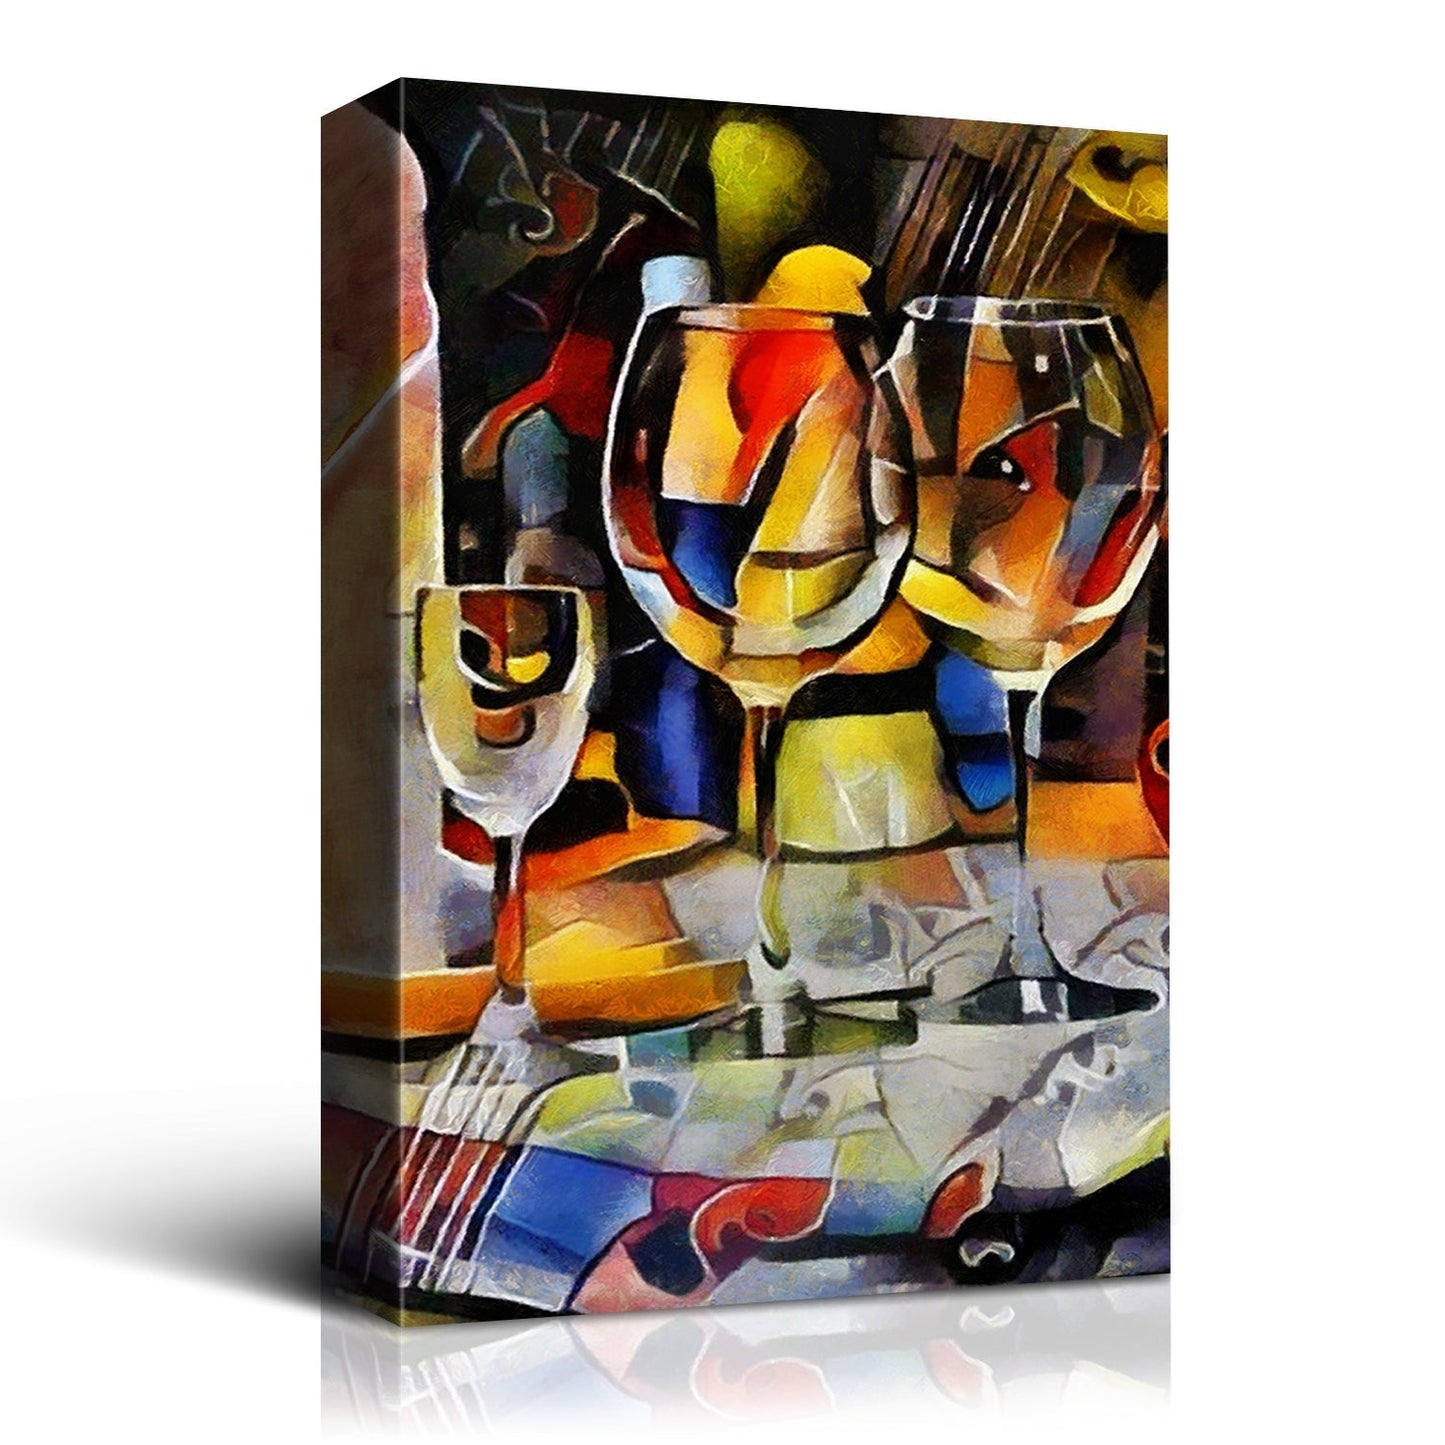 Framed Canvas Wall Art Decor Abstract Style Painting,Wine Bottle with Glasses on Bar Painting Decoration For Bar, Restrant, Kitchen, Dining Room, Office Living Room, Bedroom Decor-Ready To Hang